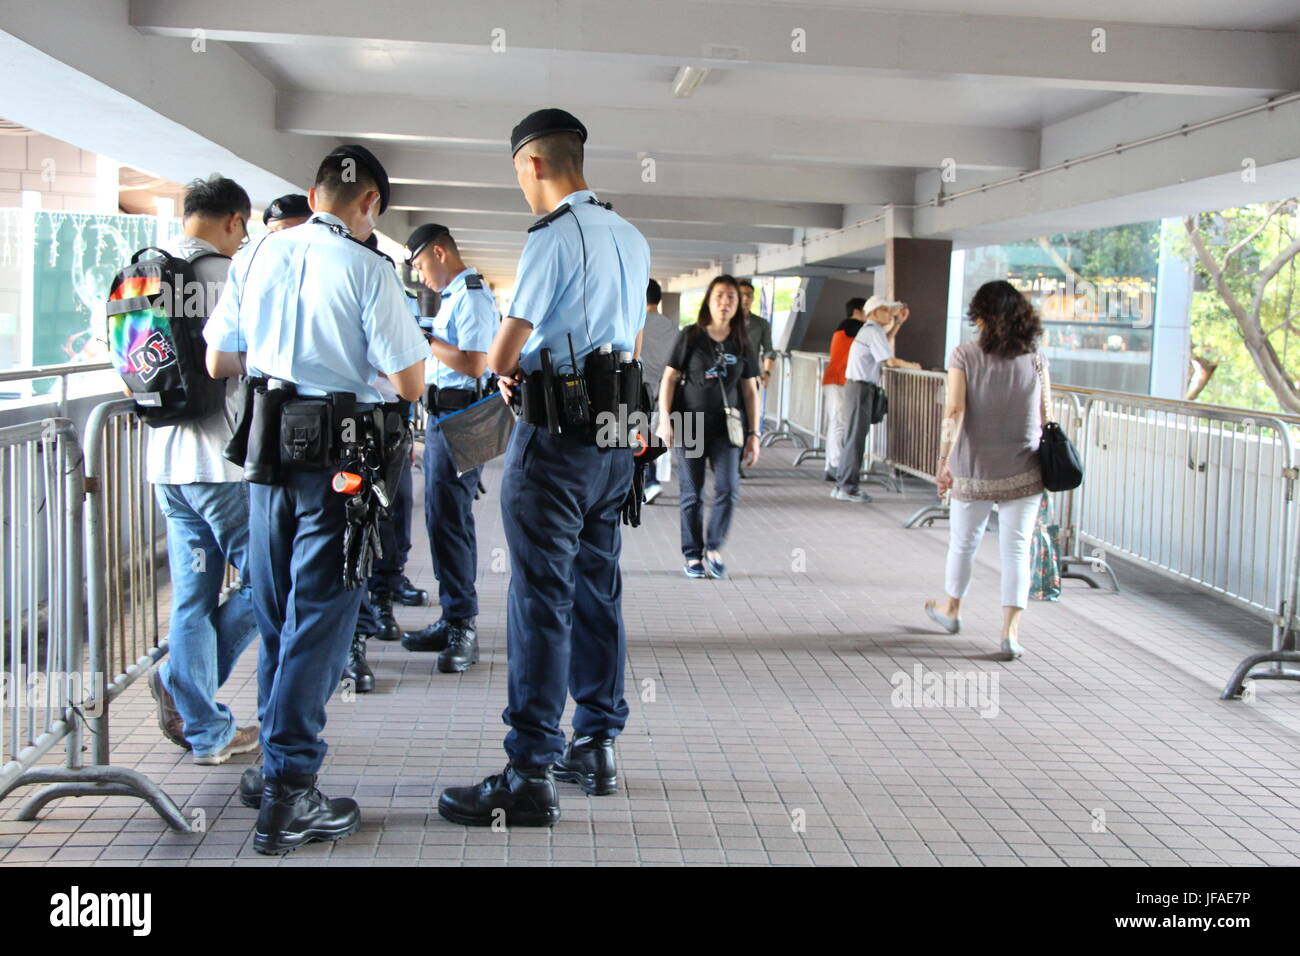 On the first day of President Xi Jinping's visit to Hong Kong, footbridges in the heart of the city were full of police officers monitoring people. Stock Photo